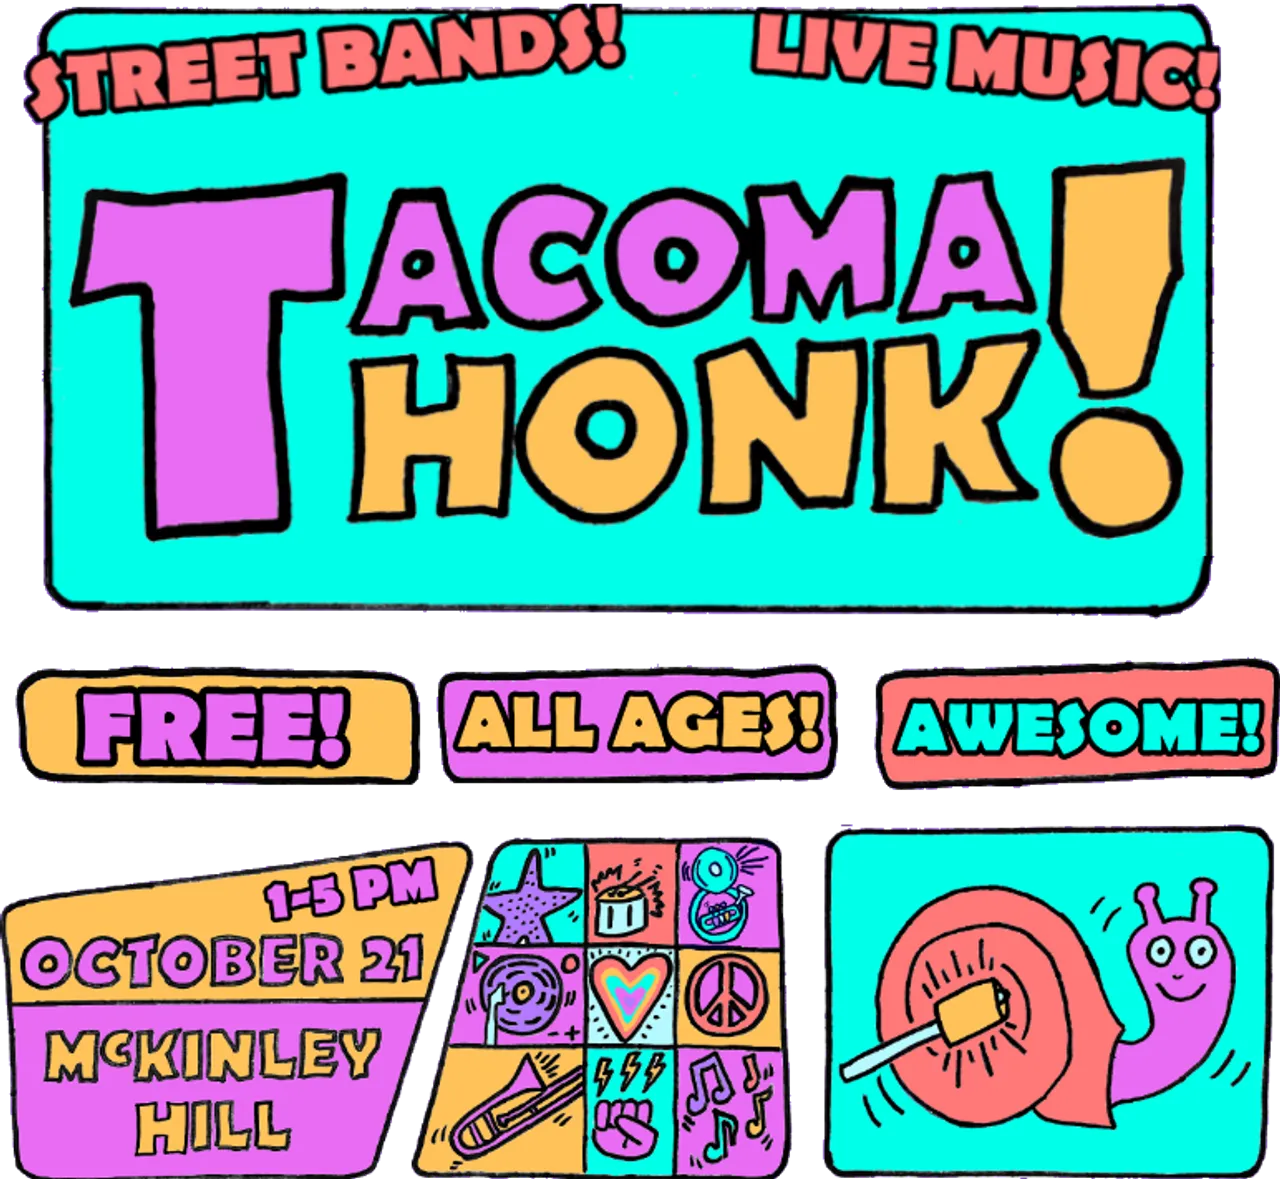 Tacoma HONK! | 1-5PM | October 21 | McKinley Hill